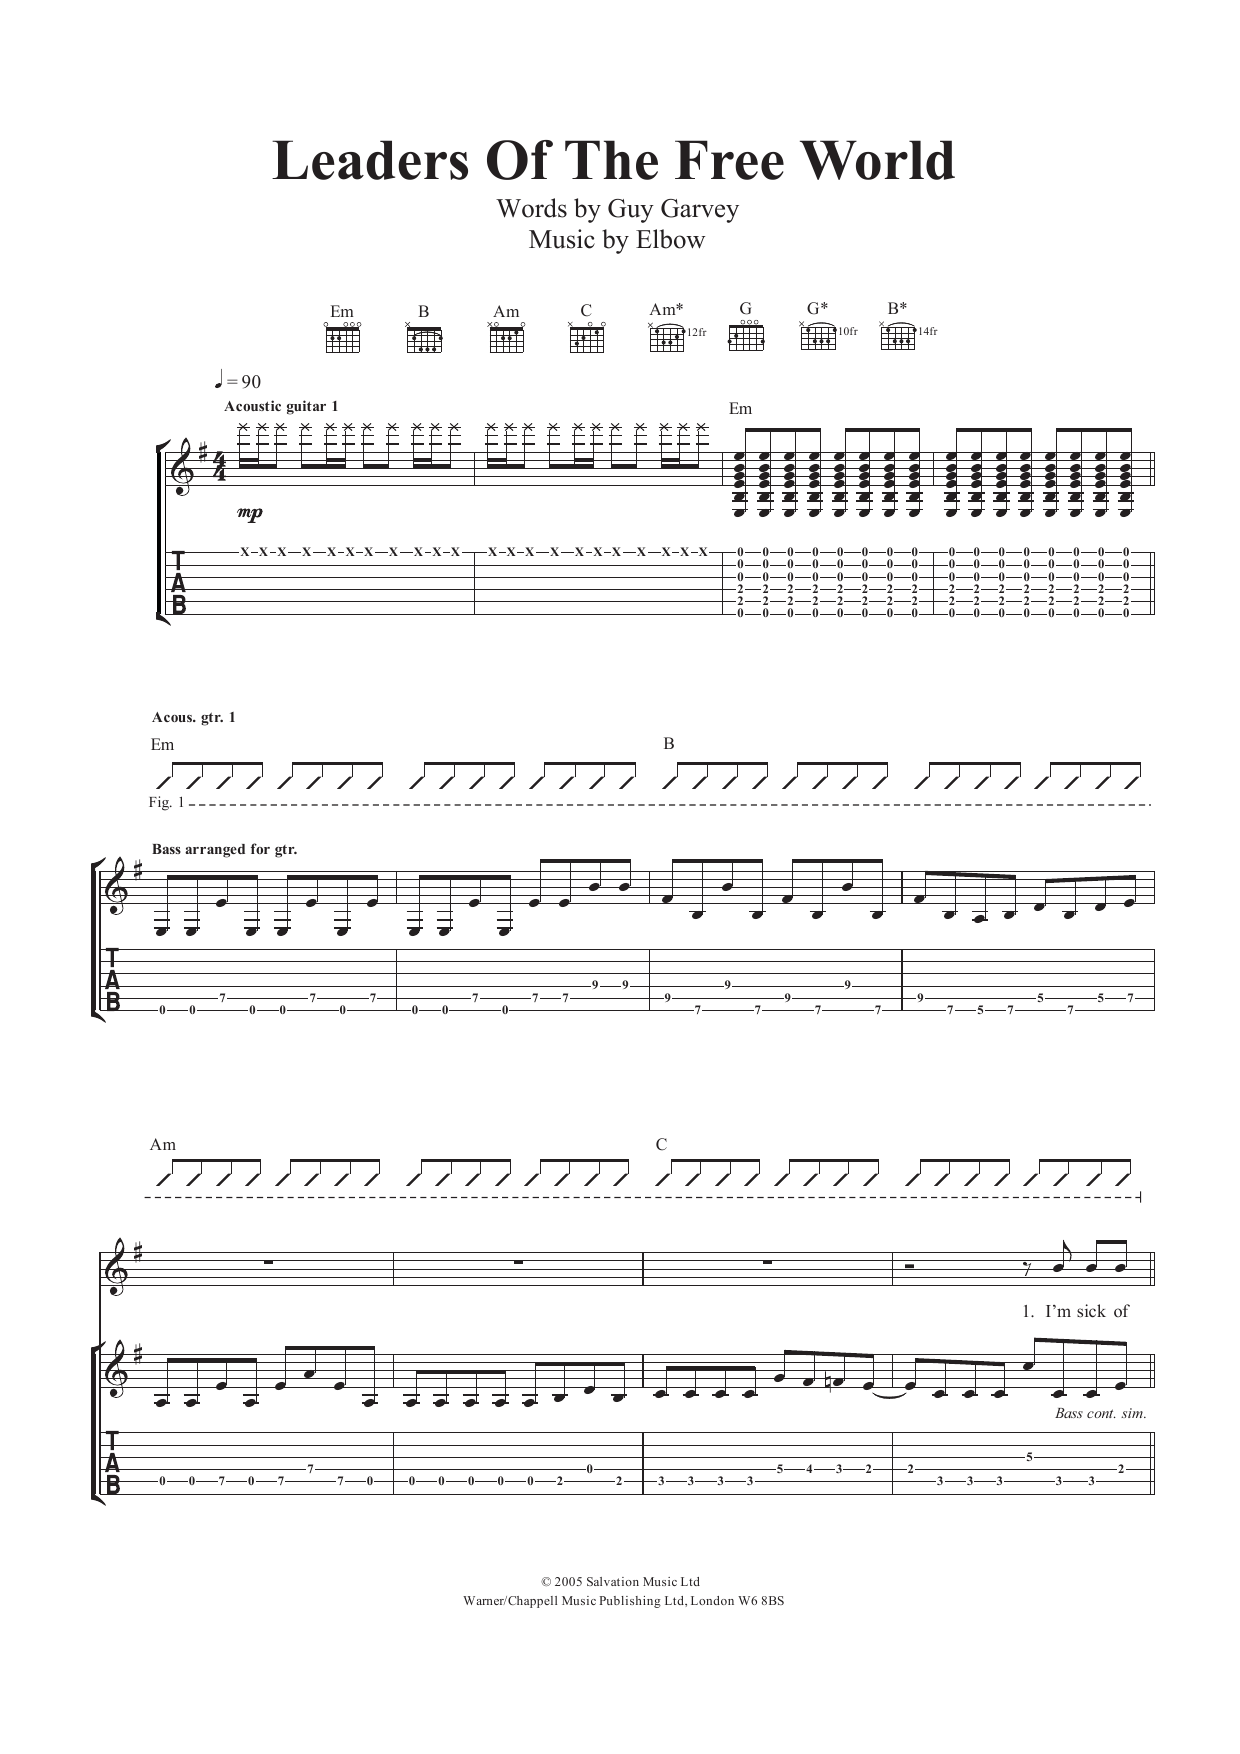 Download Elbow Leaders Of The Free World Sheet Music